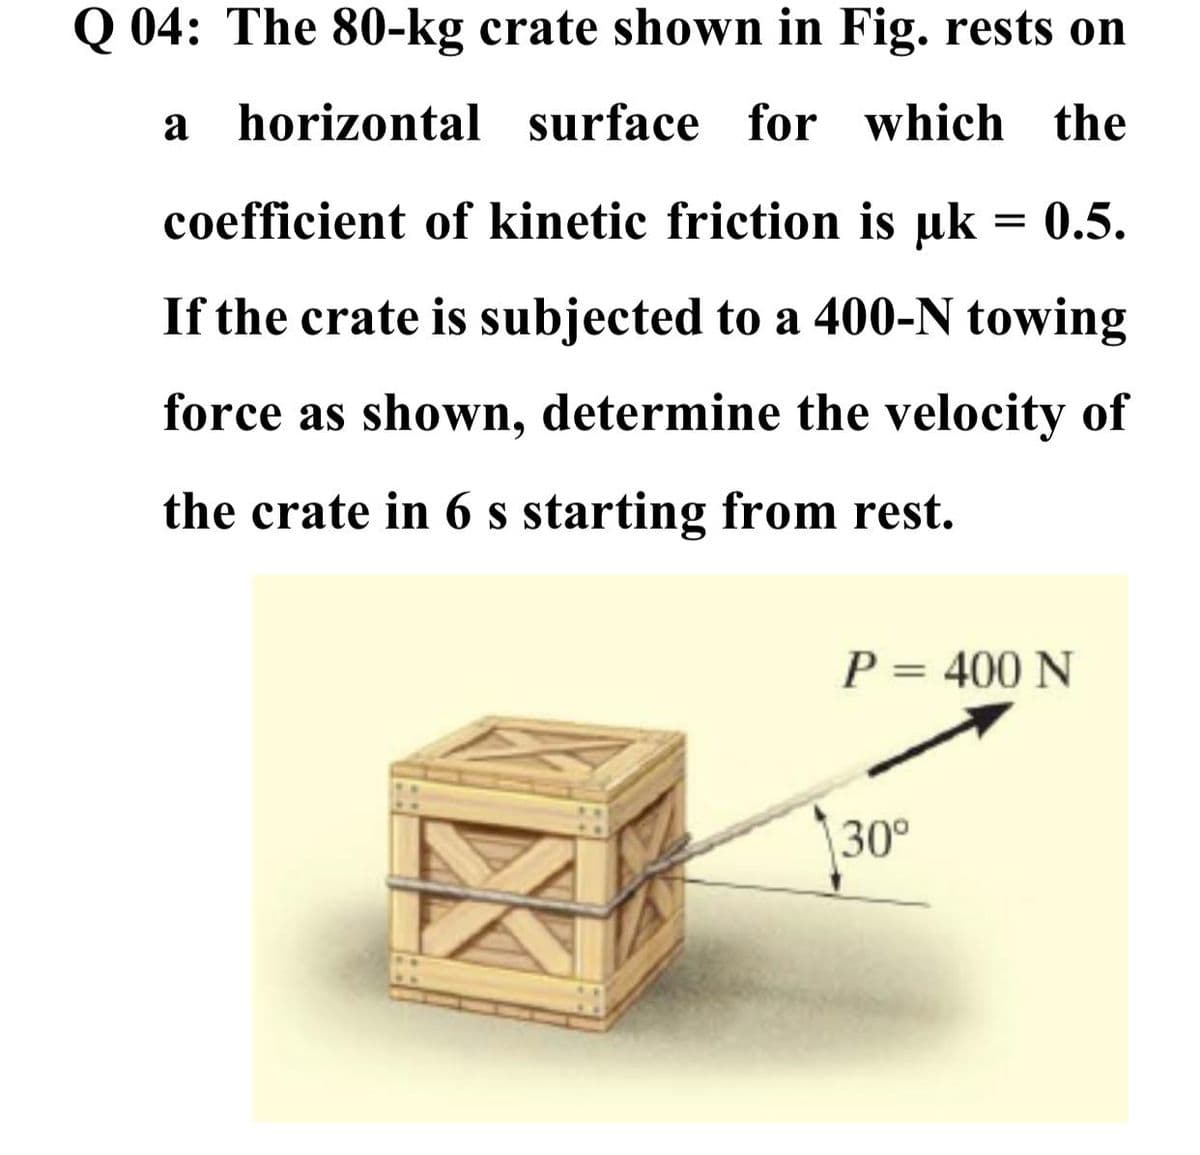 Q 04: The 80-kg crate shown in Fig. rests on
a horizontal surface for which the
coefficient of kinetic friction is uk = 0.5.
If the crate is subjected to a 400-N towing
force as shown, determine the velocity of
the crate in 6 s starting from rest.
P = 400 N
30°
